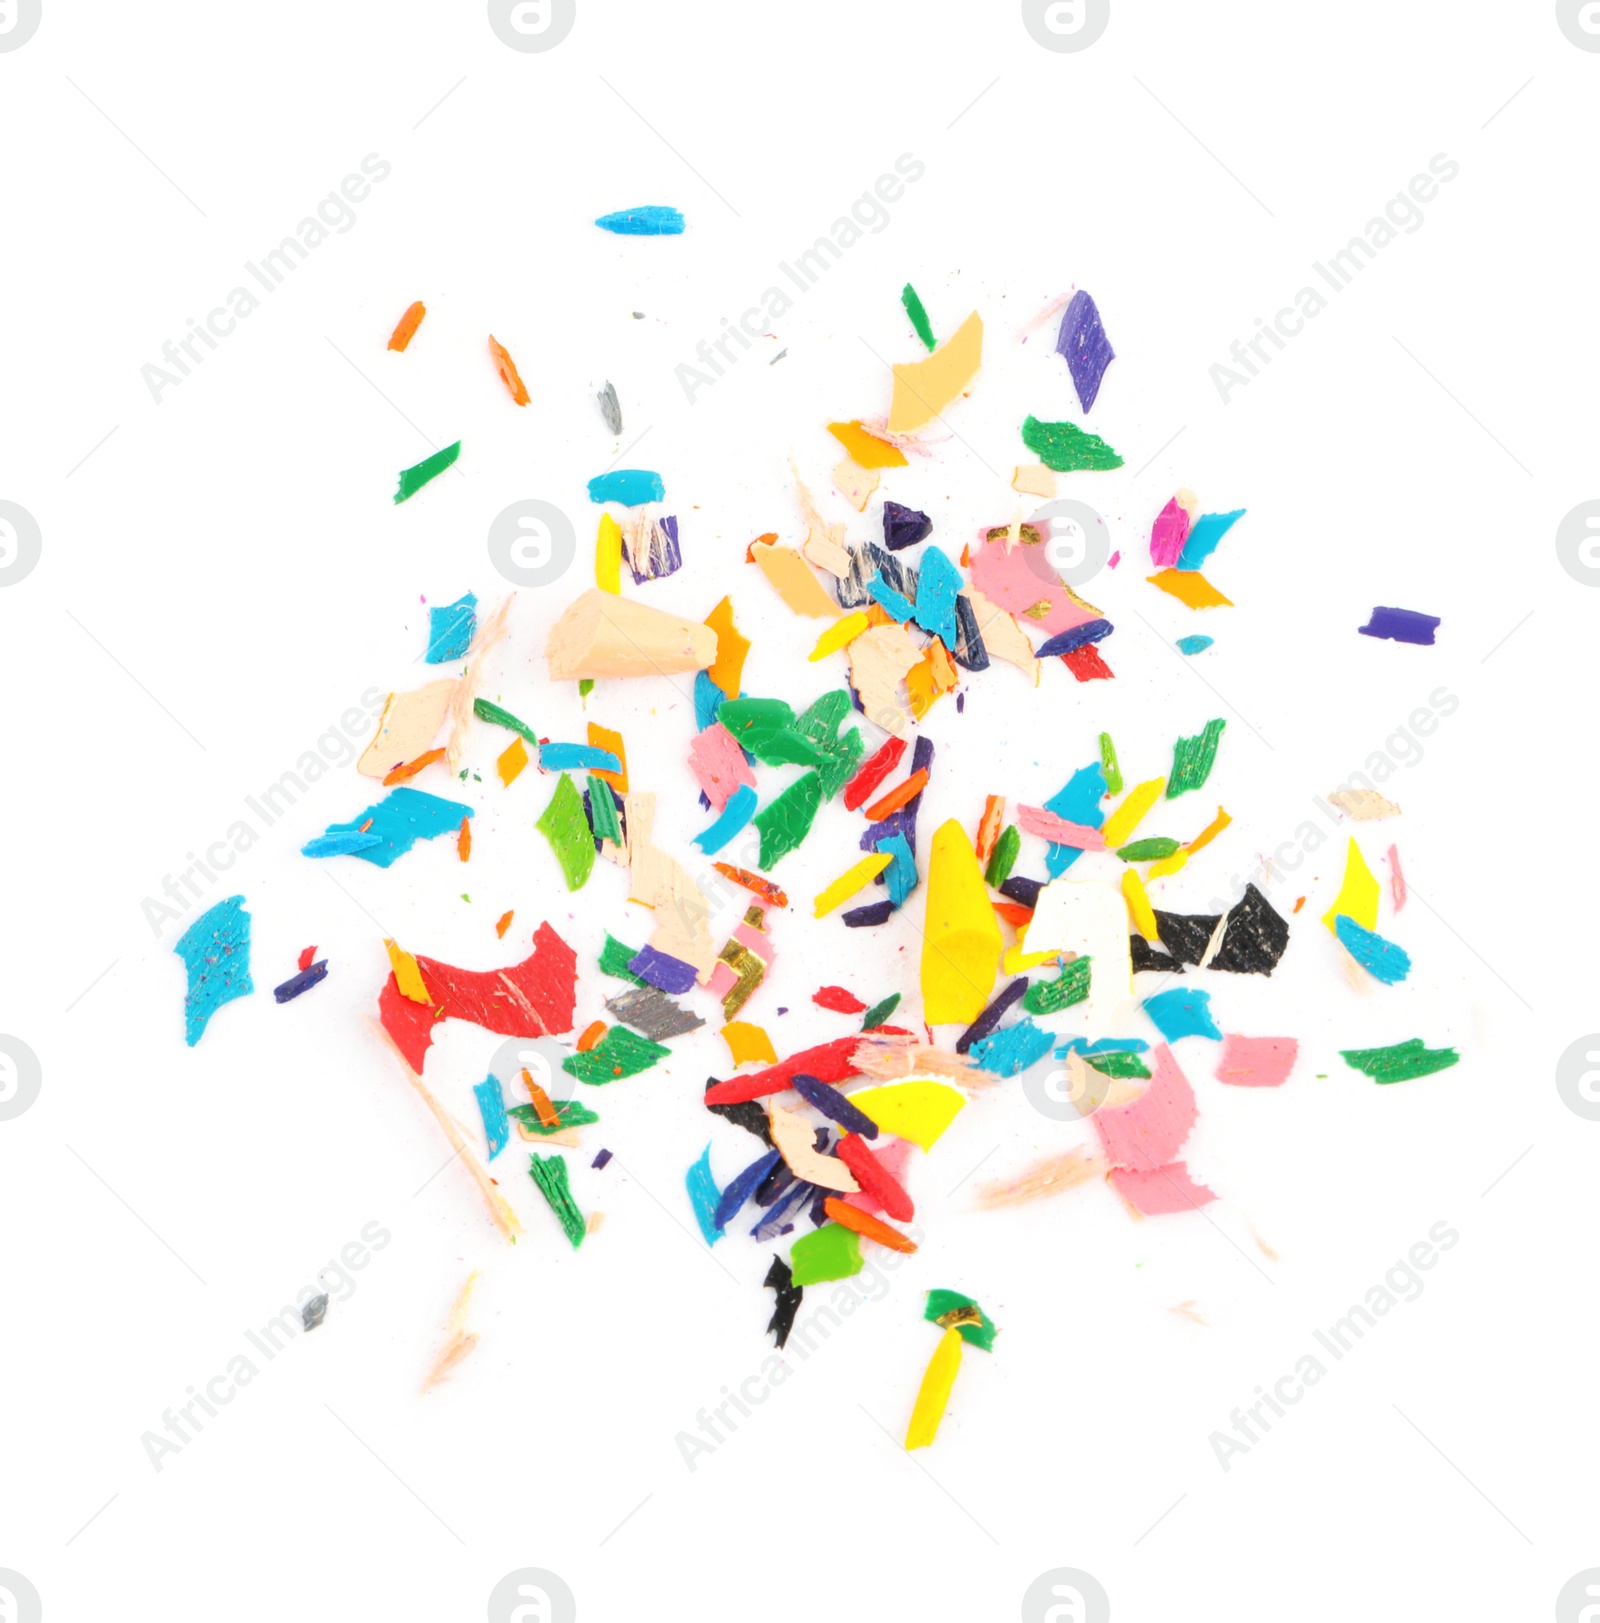 Photo of Colorful graphite crumbs on white background, top view. Pencil sharpening